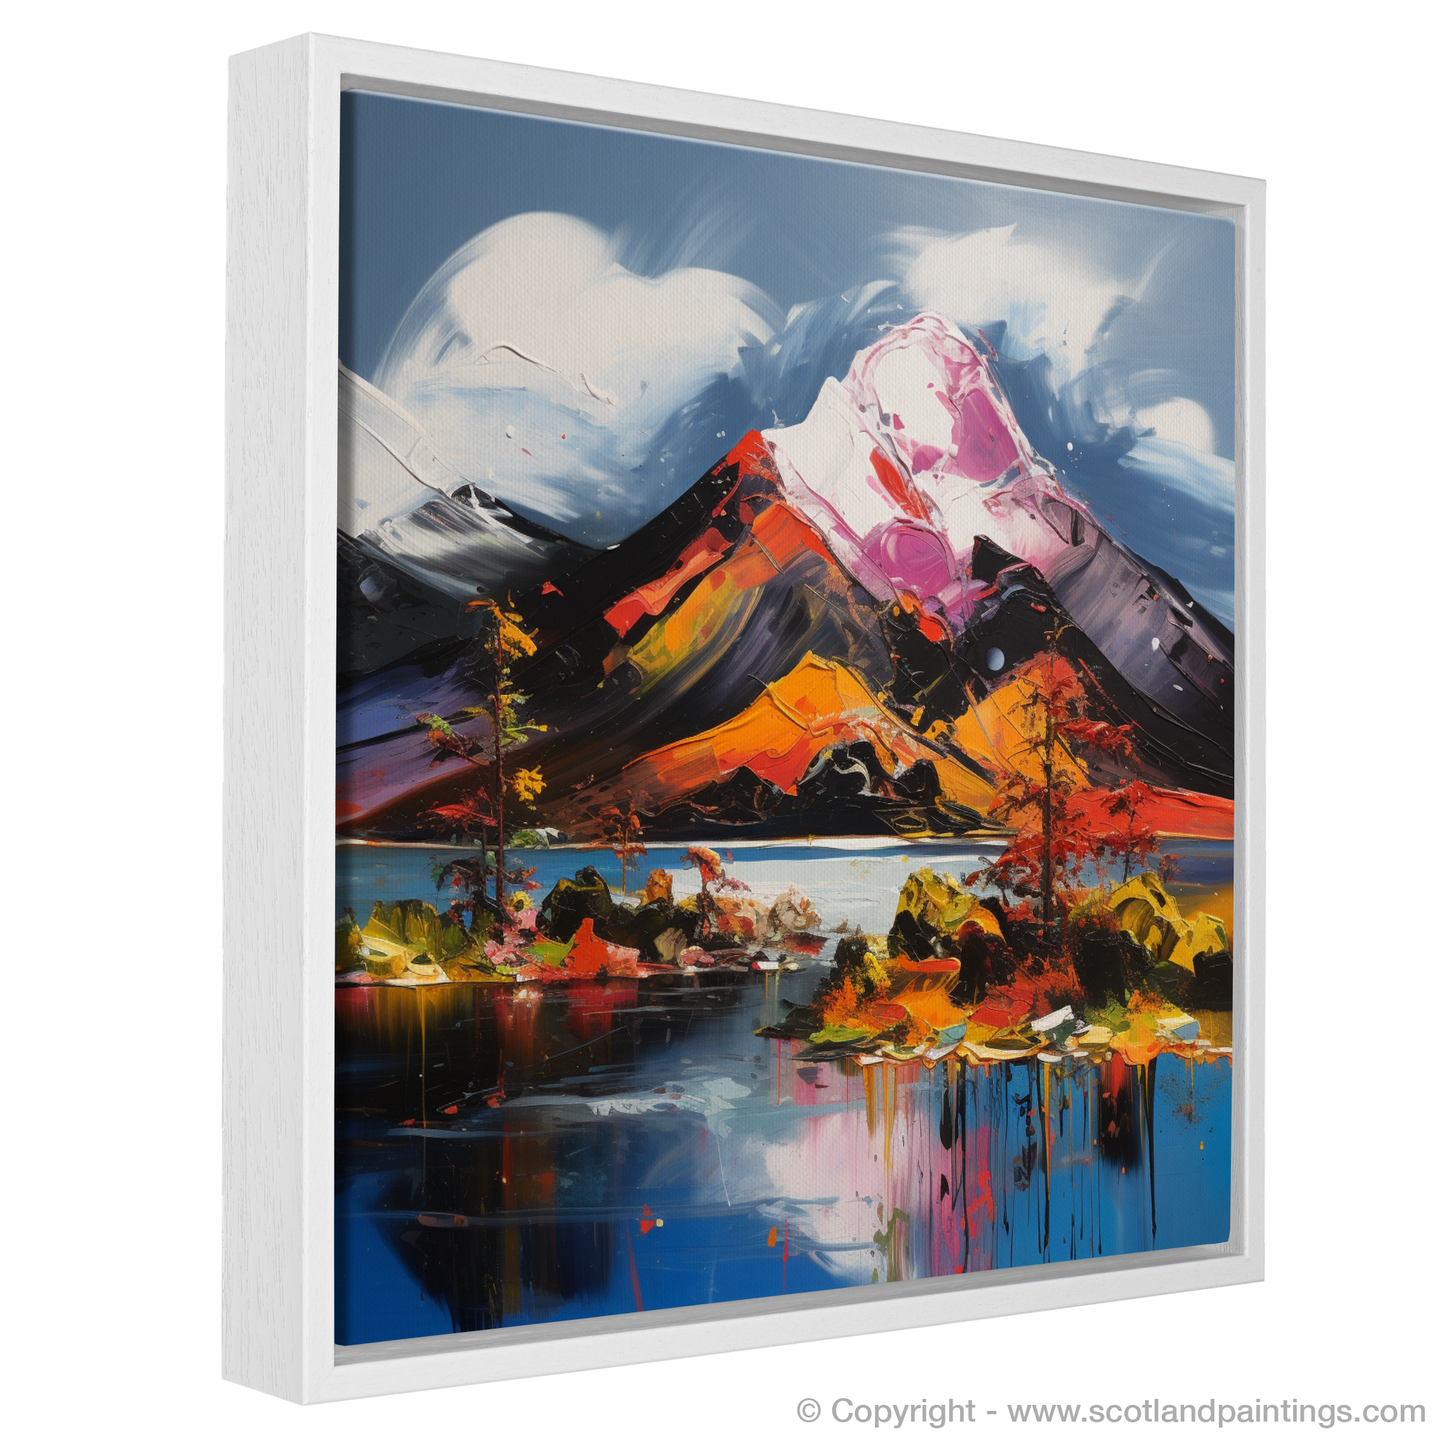 Painting and Art Print of Ben Lomond entitled "Ben Lomond in Expressionist Verve".